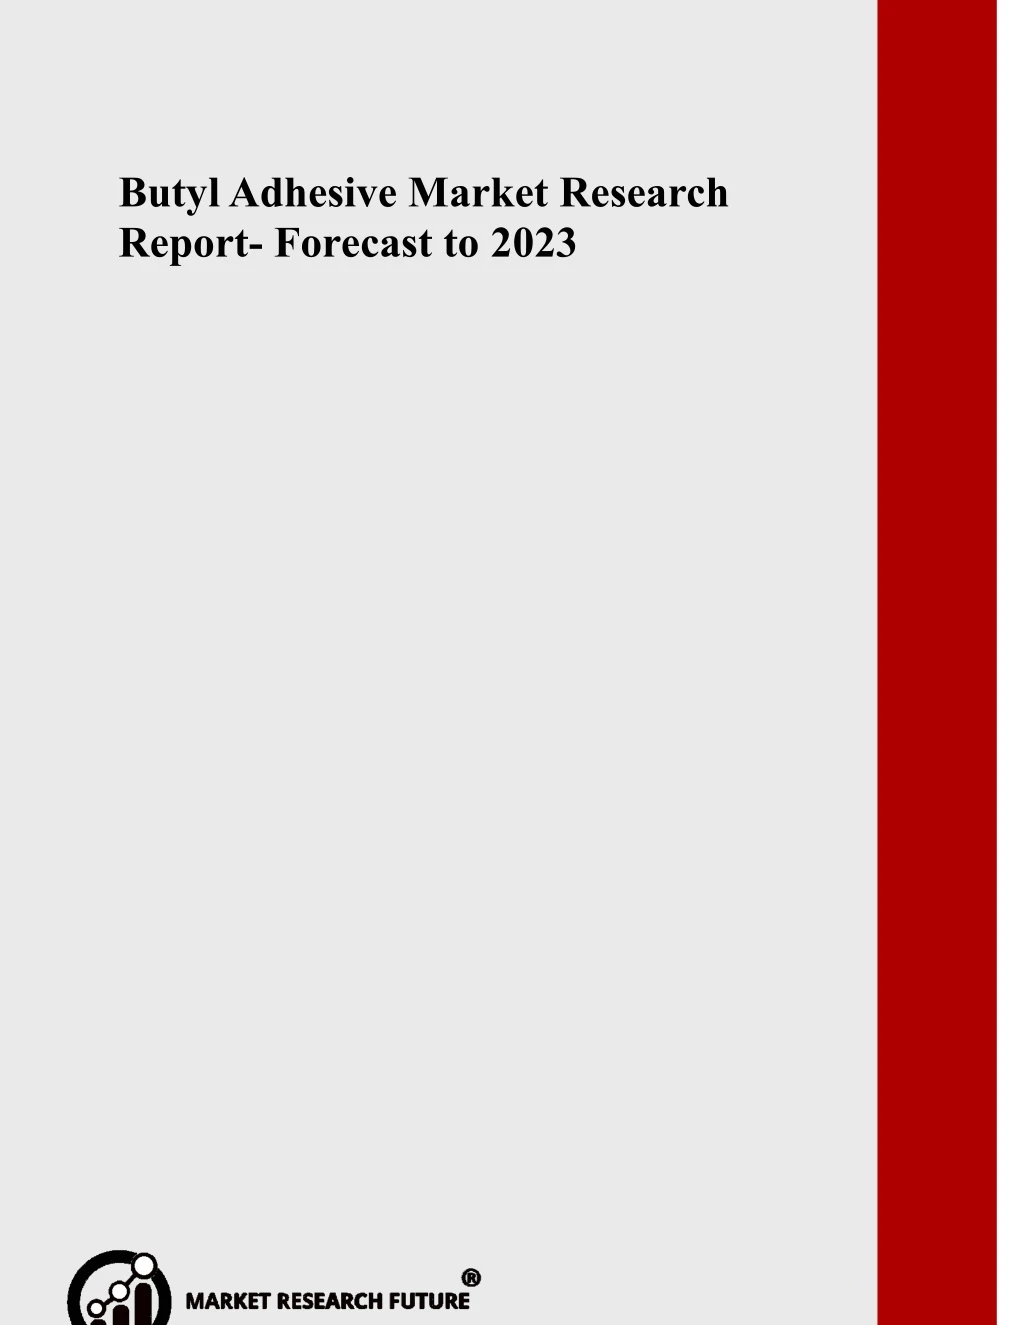 butyl adhesive market research report forecast